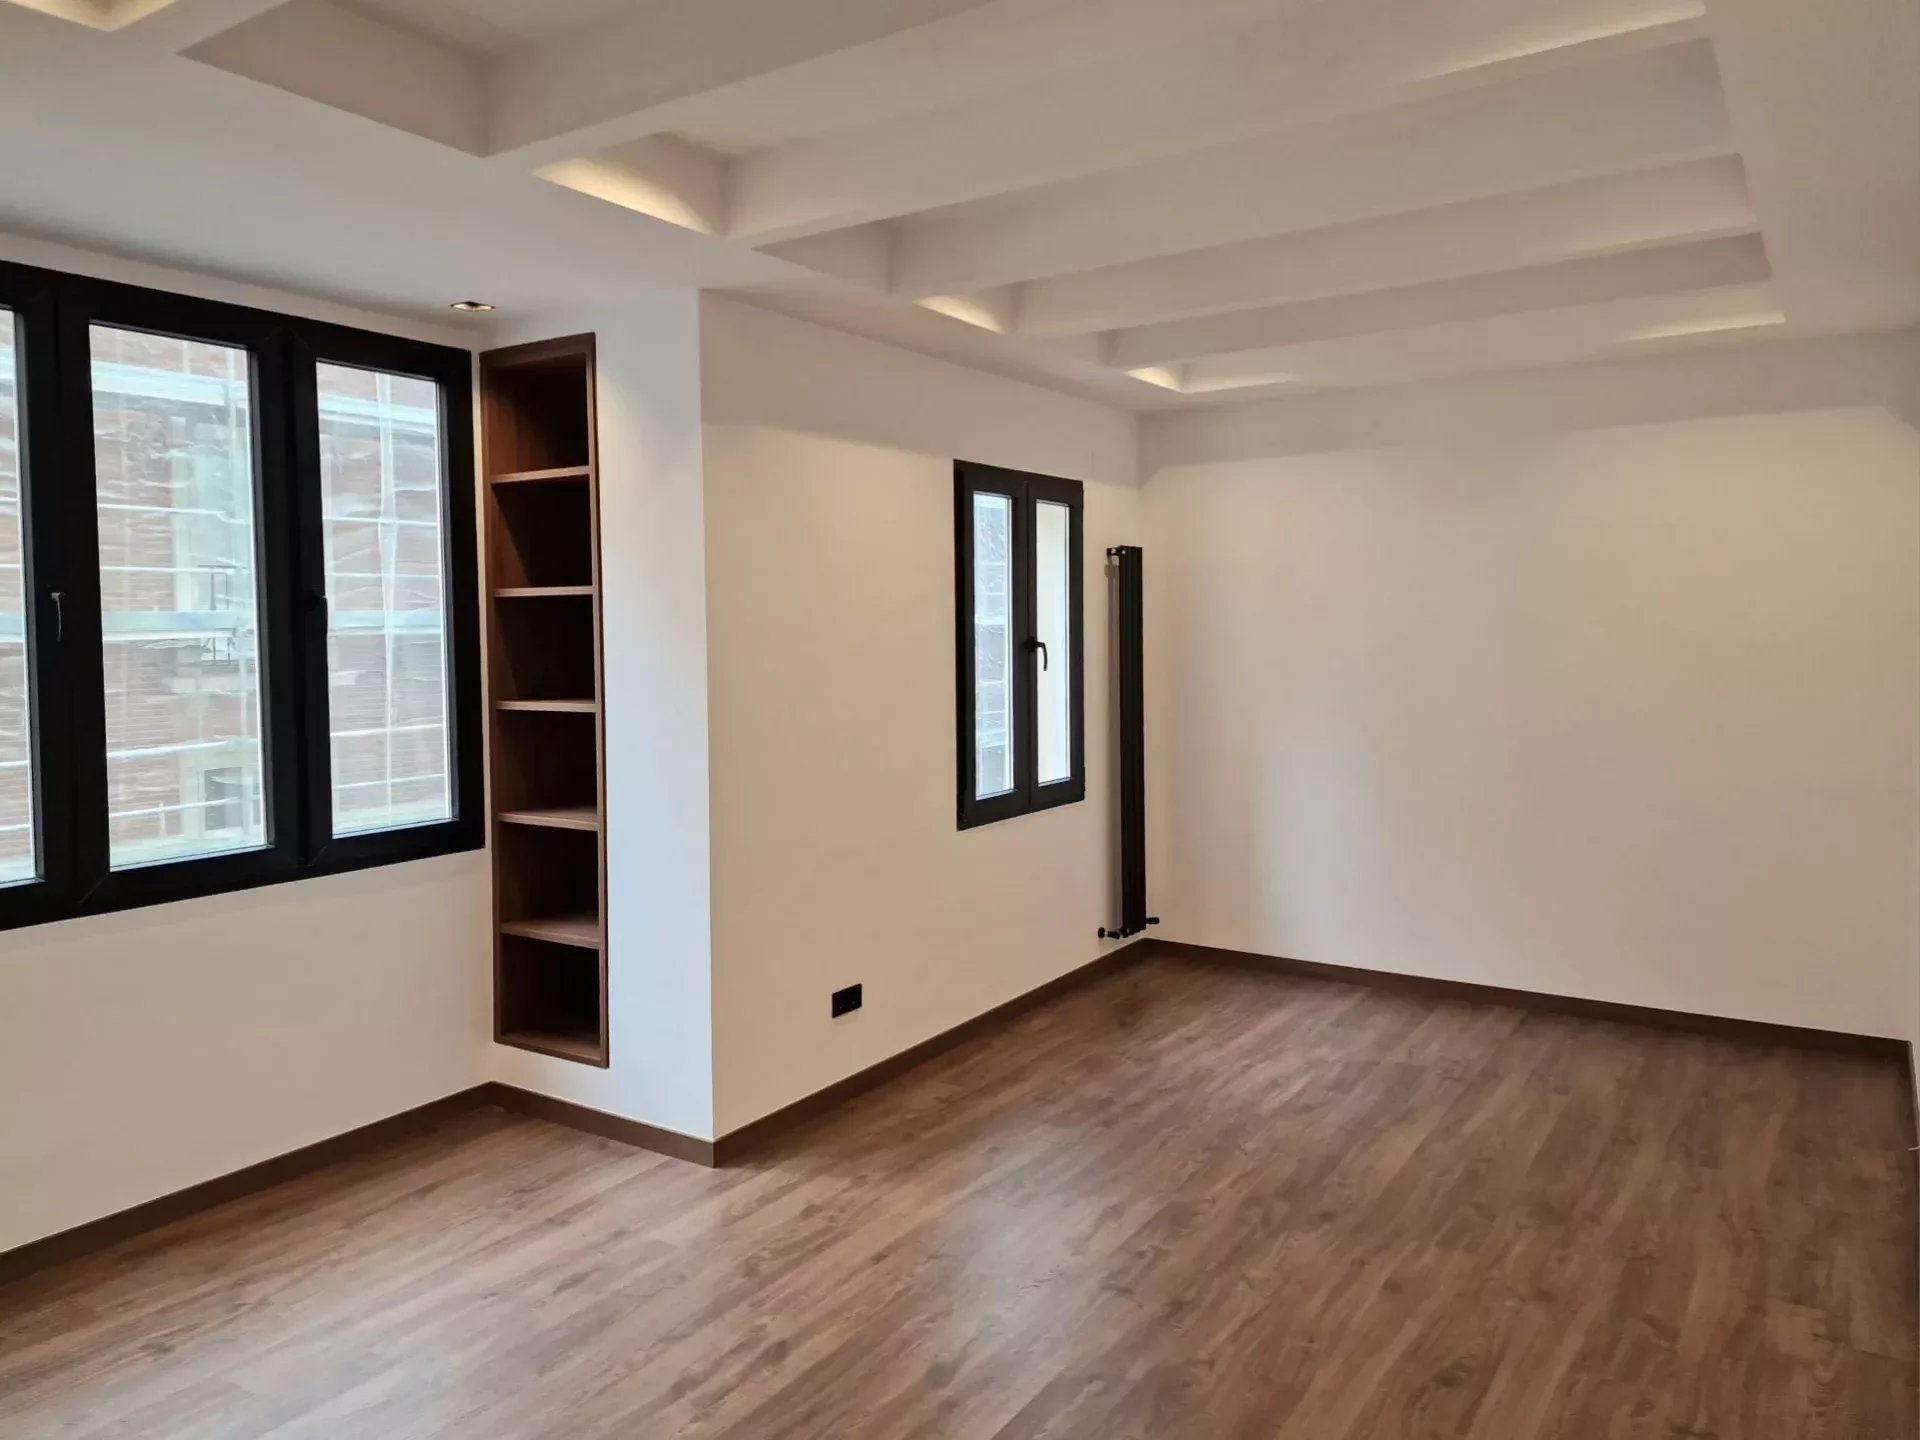 Brand new flat in the heart of Chamberí